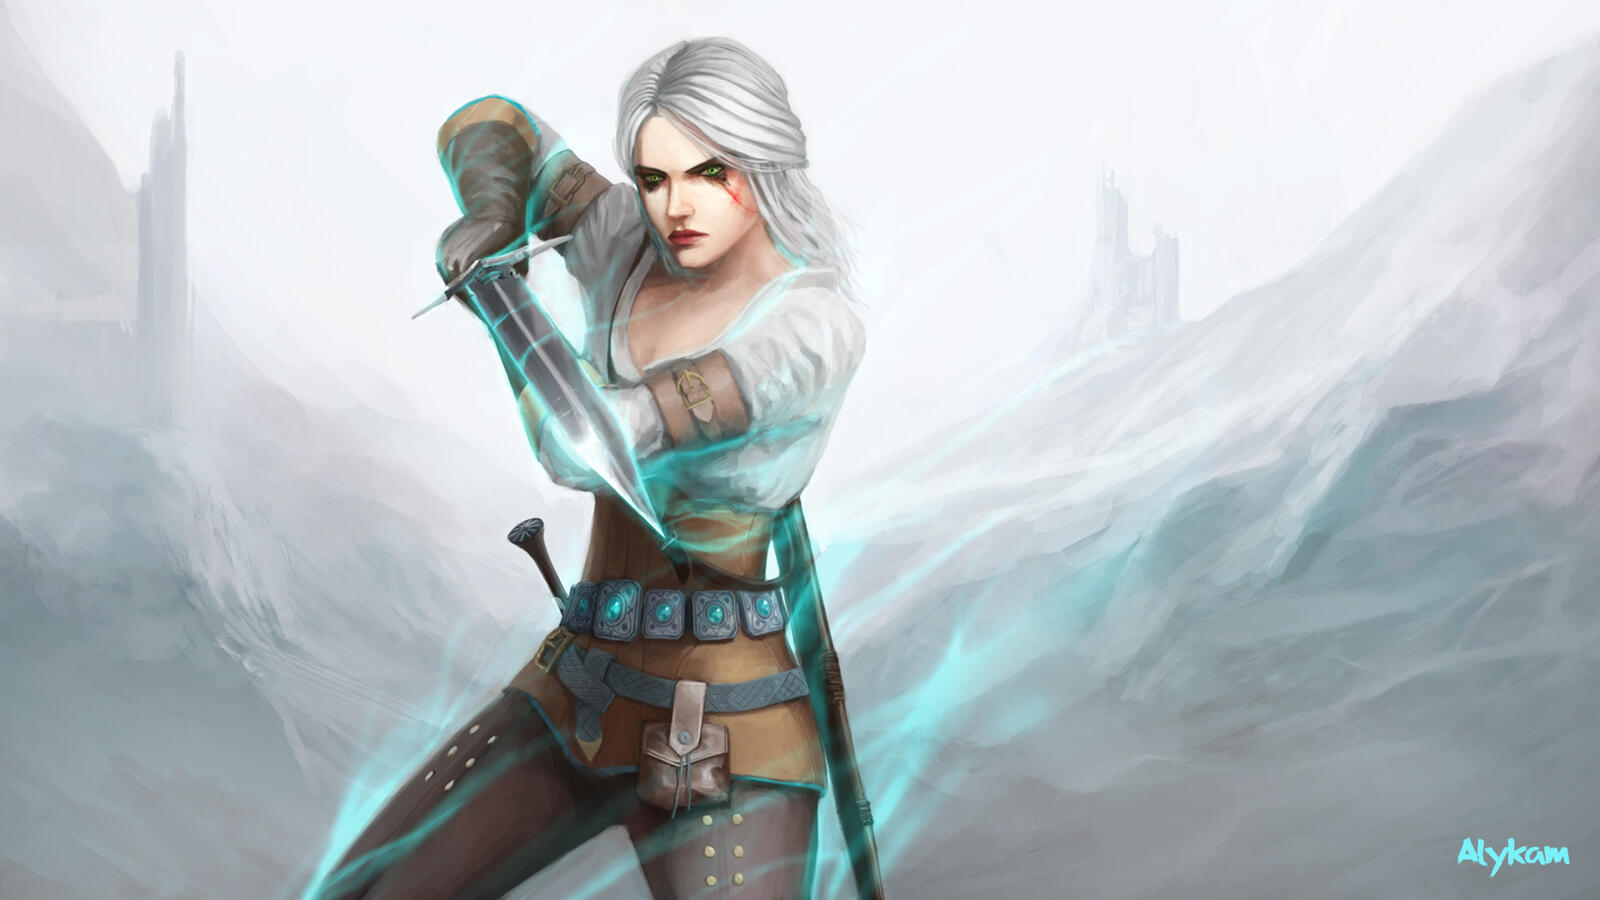 Wallpapers ciri The Witcher 3 games on the desktop